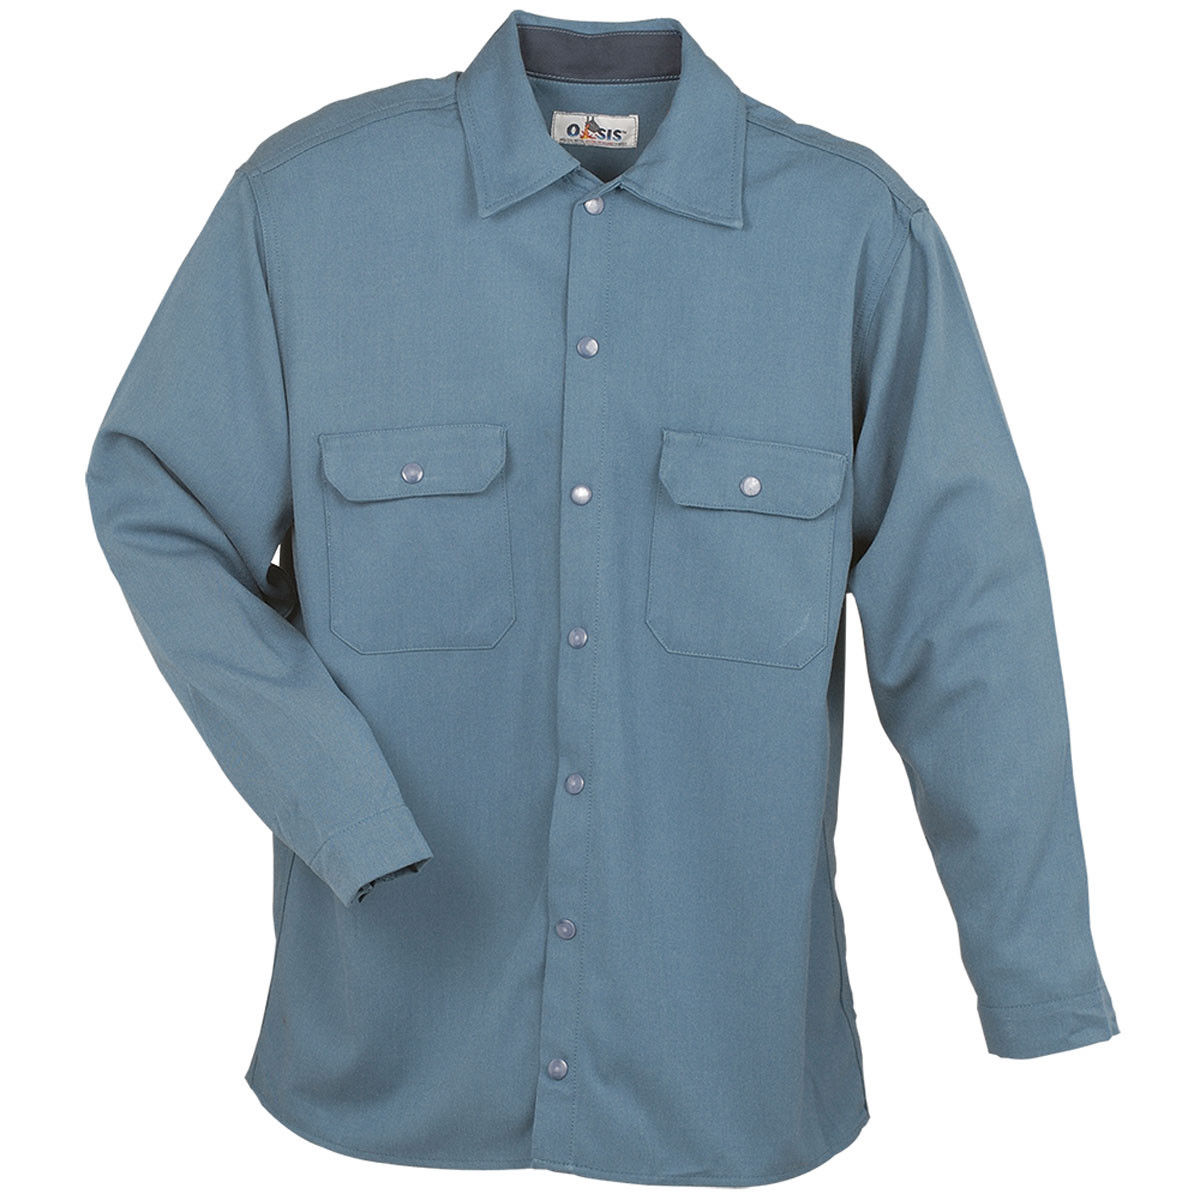 Flame Resistant Oasis Work Shirts Questions & Answers